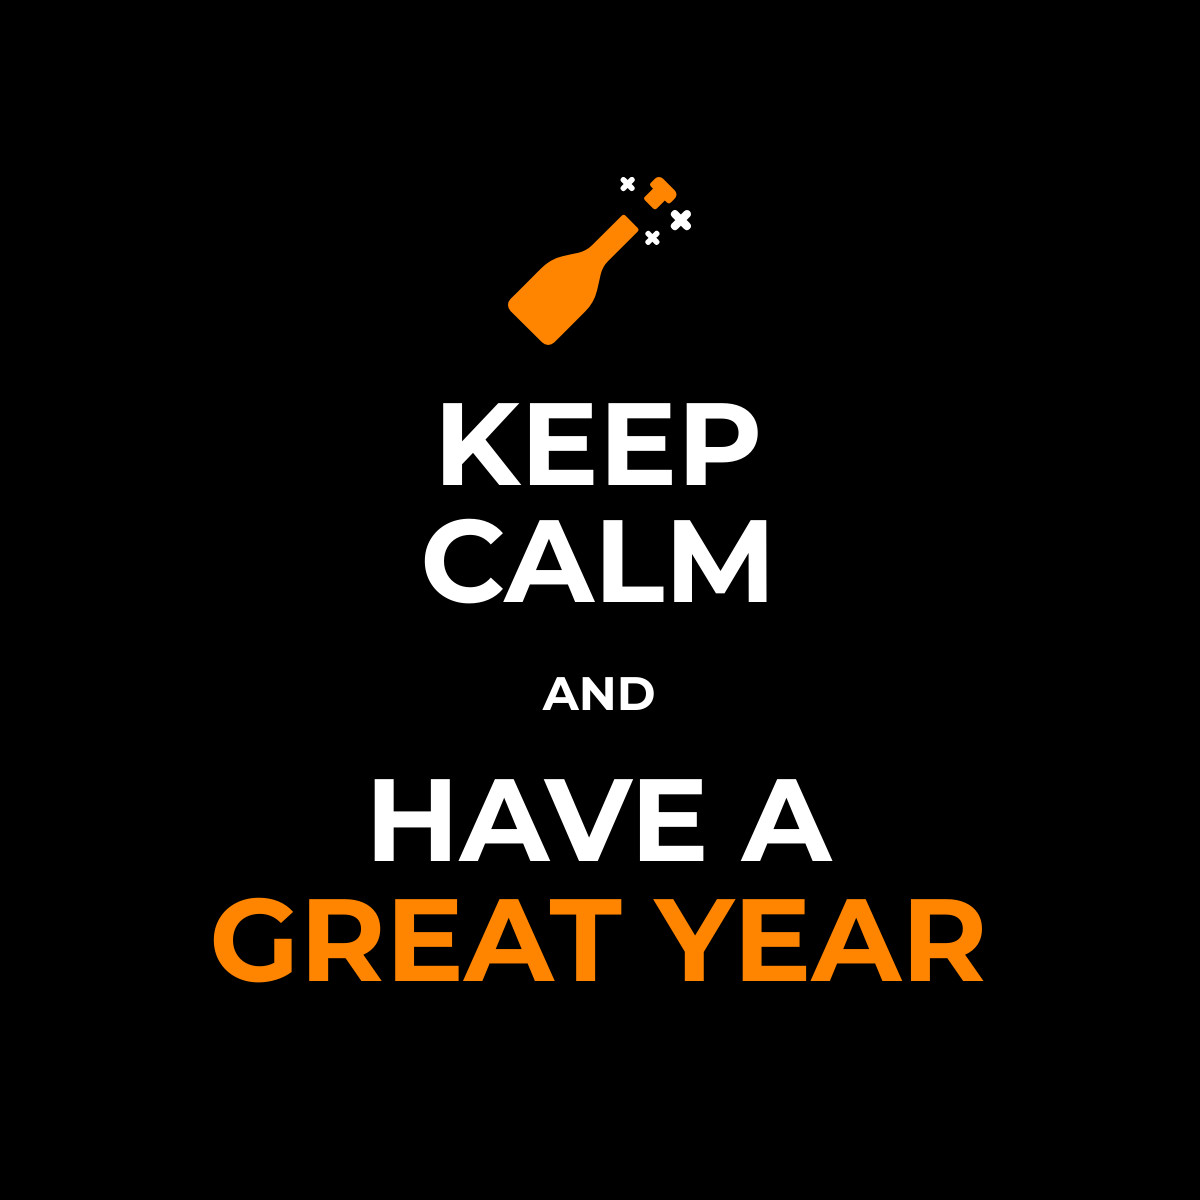 Keep Calm and Have a Great Year Responsive Square Art 1200x1200